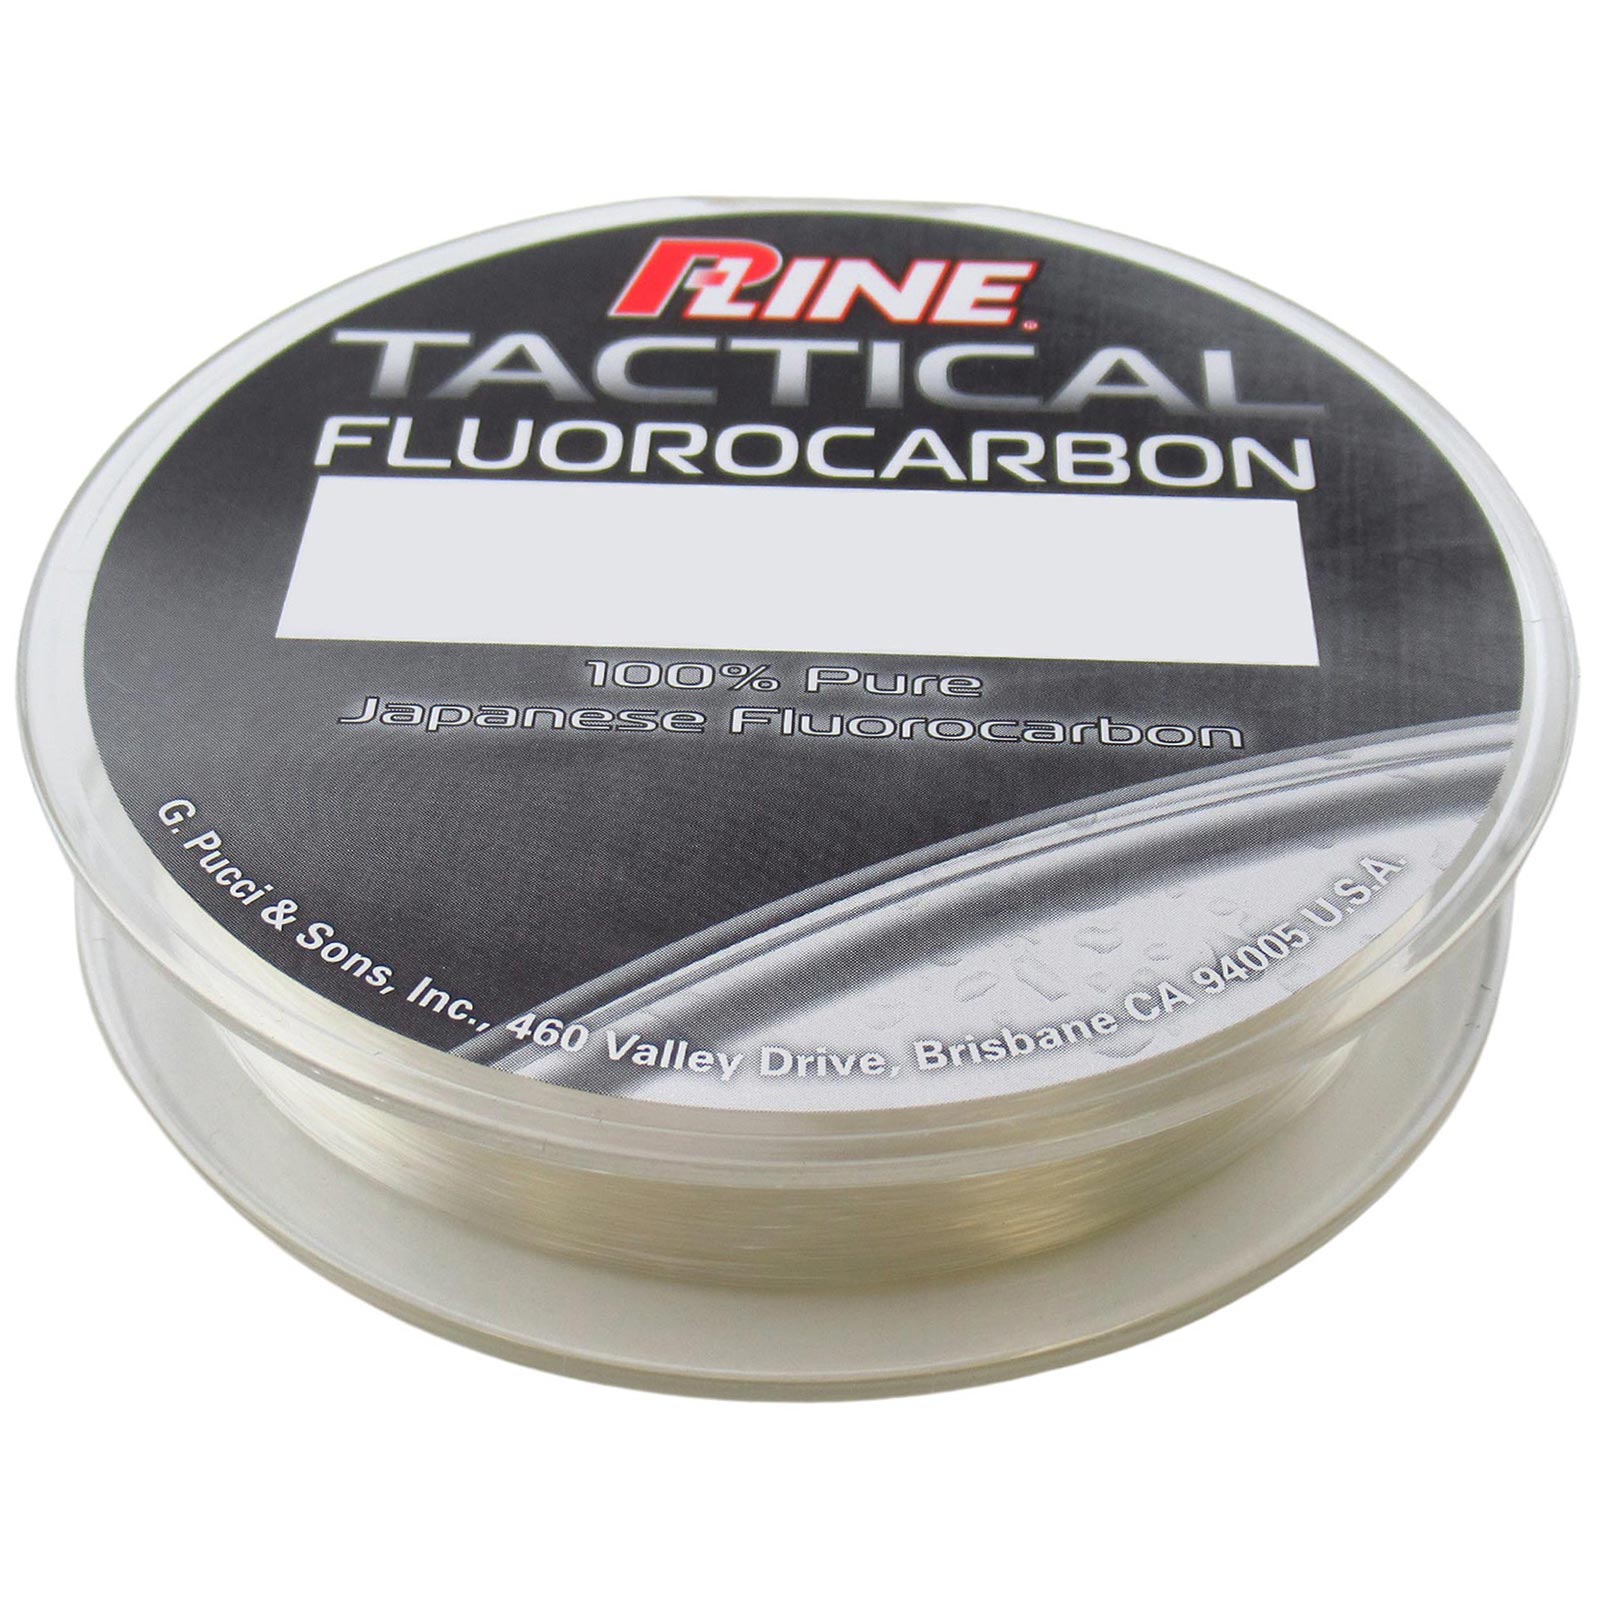  P-Line FCCBF-20 Fccbf-20 600Yd Fluorocarbon Coated : Sports &  Outdoors